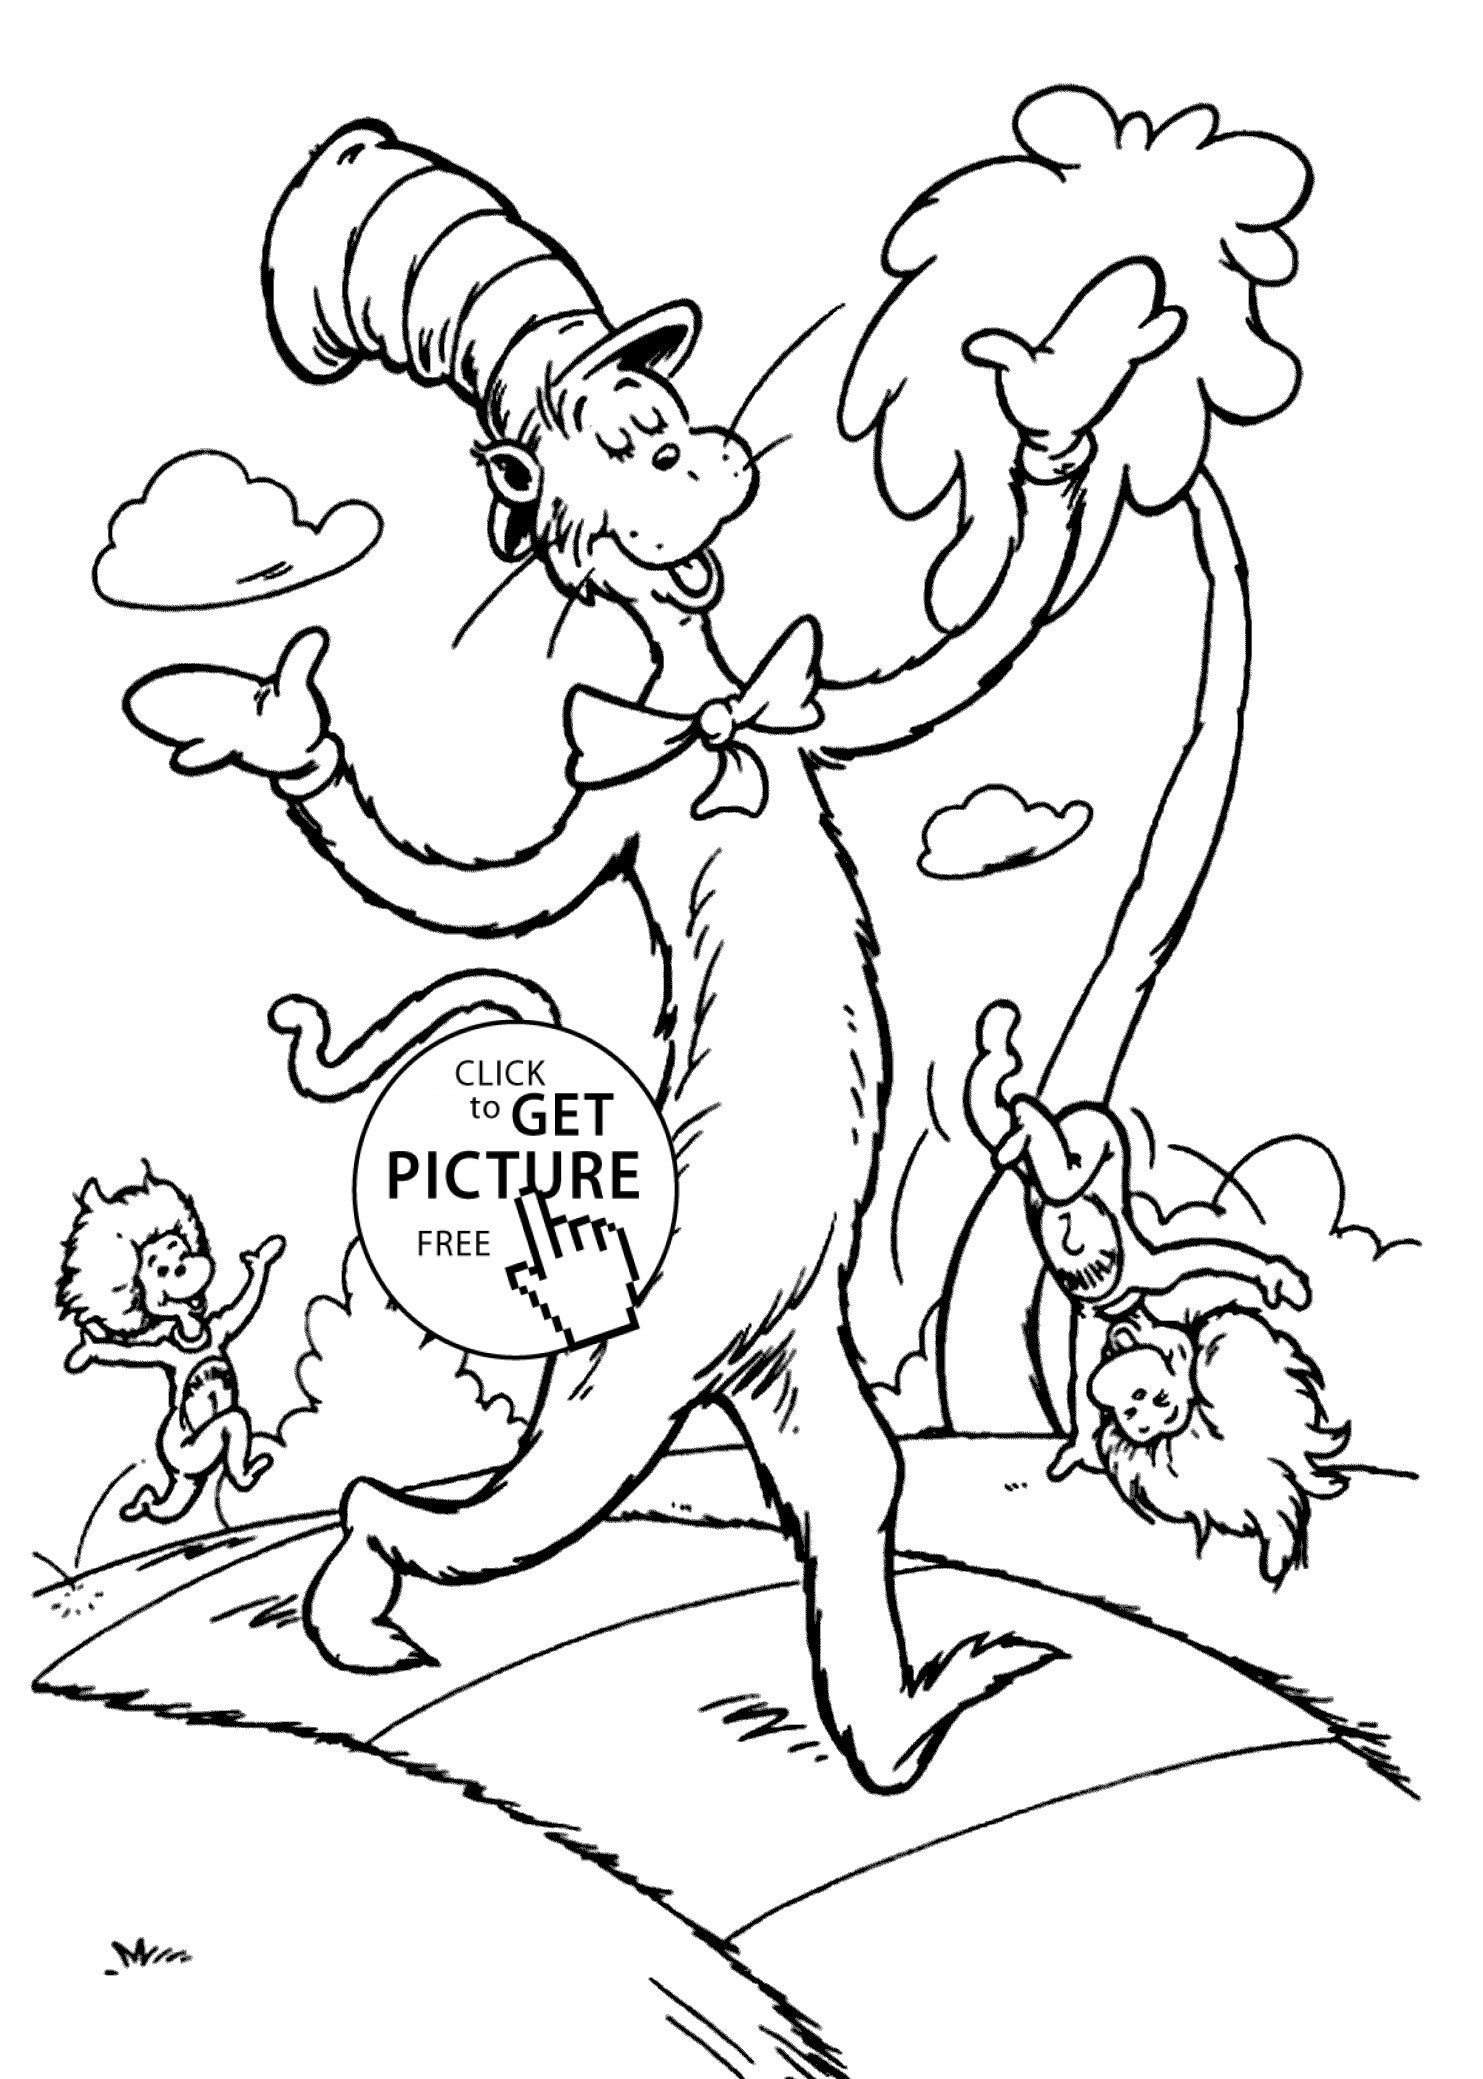 Dr.Seuss Coloring Pages For Kids
 The Сat in the hat and promenade coloring pages for kids